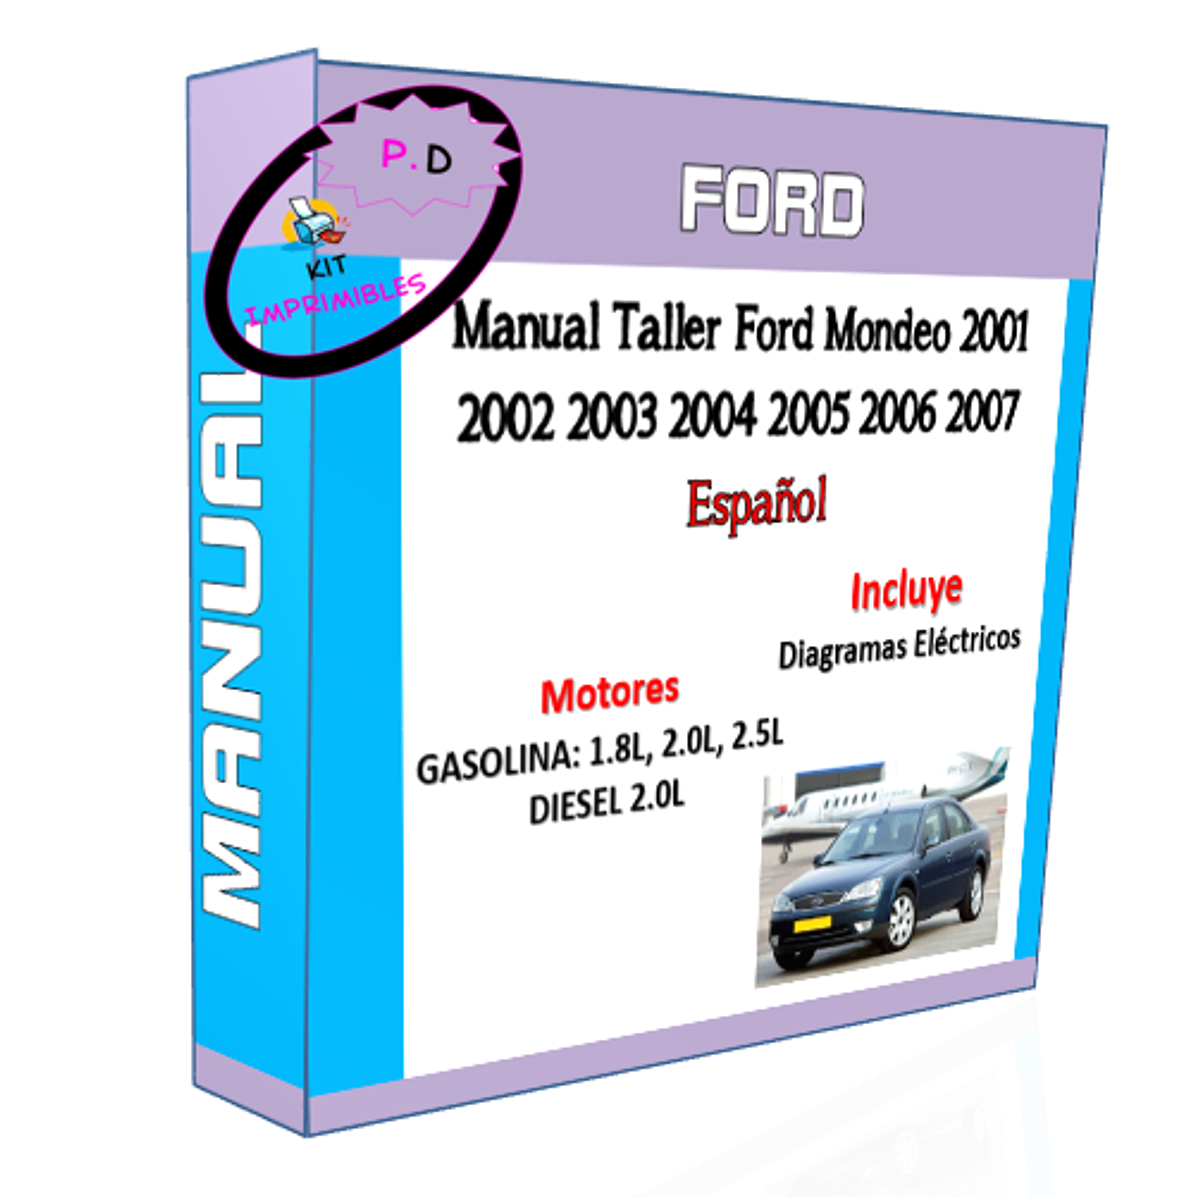 Manual Taller Ford Mondeo 2001 2002 2003 2004 2005 2006-07